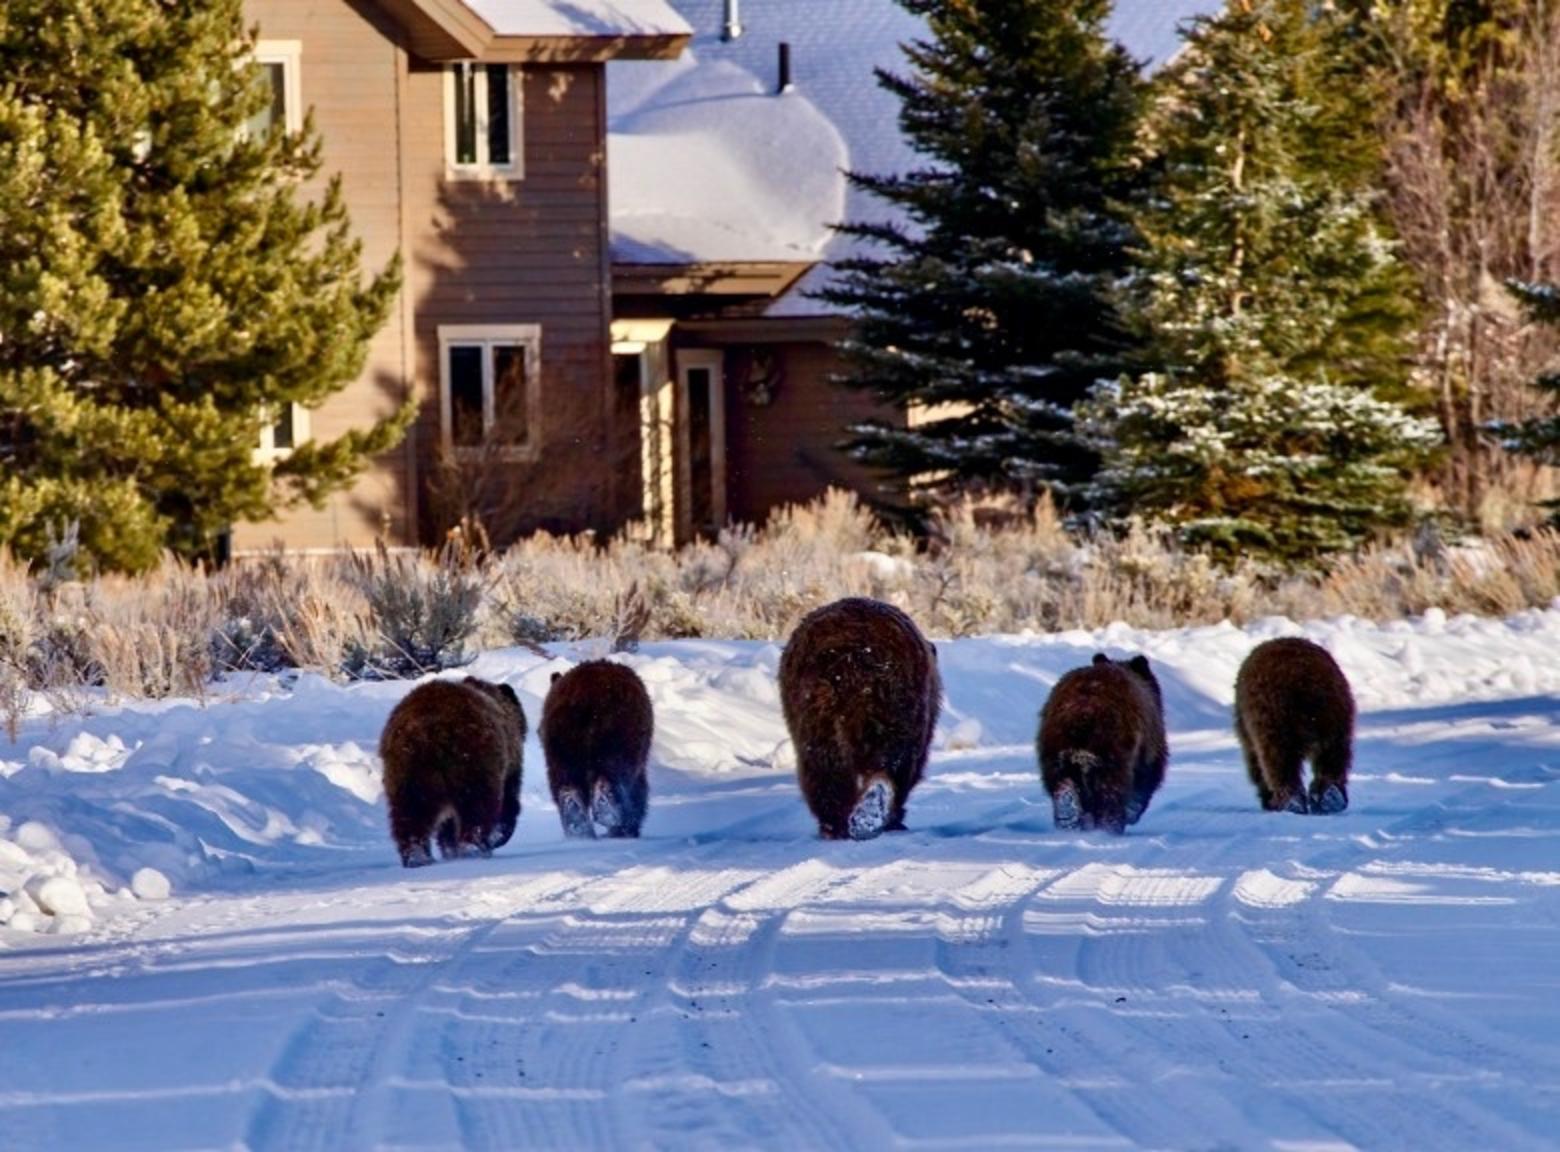 Jackson Hole nature photographer captured this photograph in autumn 2021 of famed Grizzly 399 and her four cubs lumbering thorugh a developed area in Jackson Hole. In spring 2022, one of the cubs, a 2.5-year-old male, was captured and euthanized because it wandered onto the porch of a cabin near Cora, Wyoming where it got into human food. The rapid proliferation of private land sprawl in rural areas is negatively impacting habitat security for grizzlies, including on nearby public lands. It is also creating "conflict bears" and taking some relocation sites off the table. Photo courtesy Tom Mangelsen (mangelsen.com)